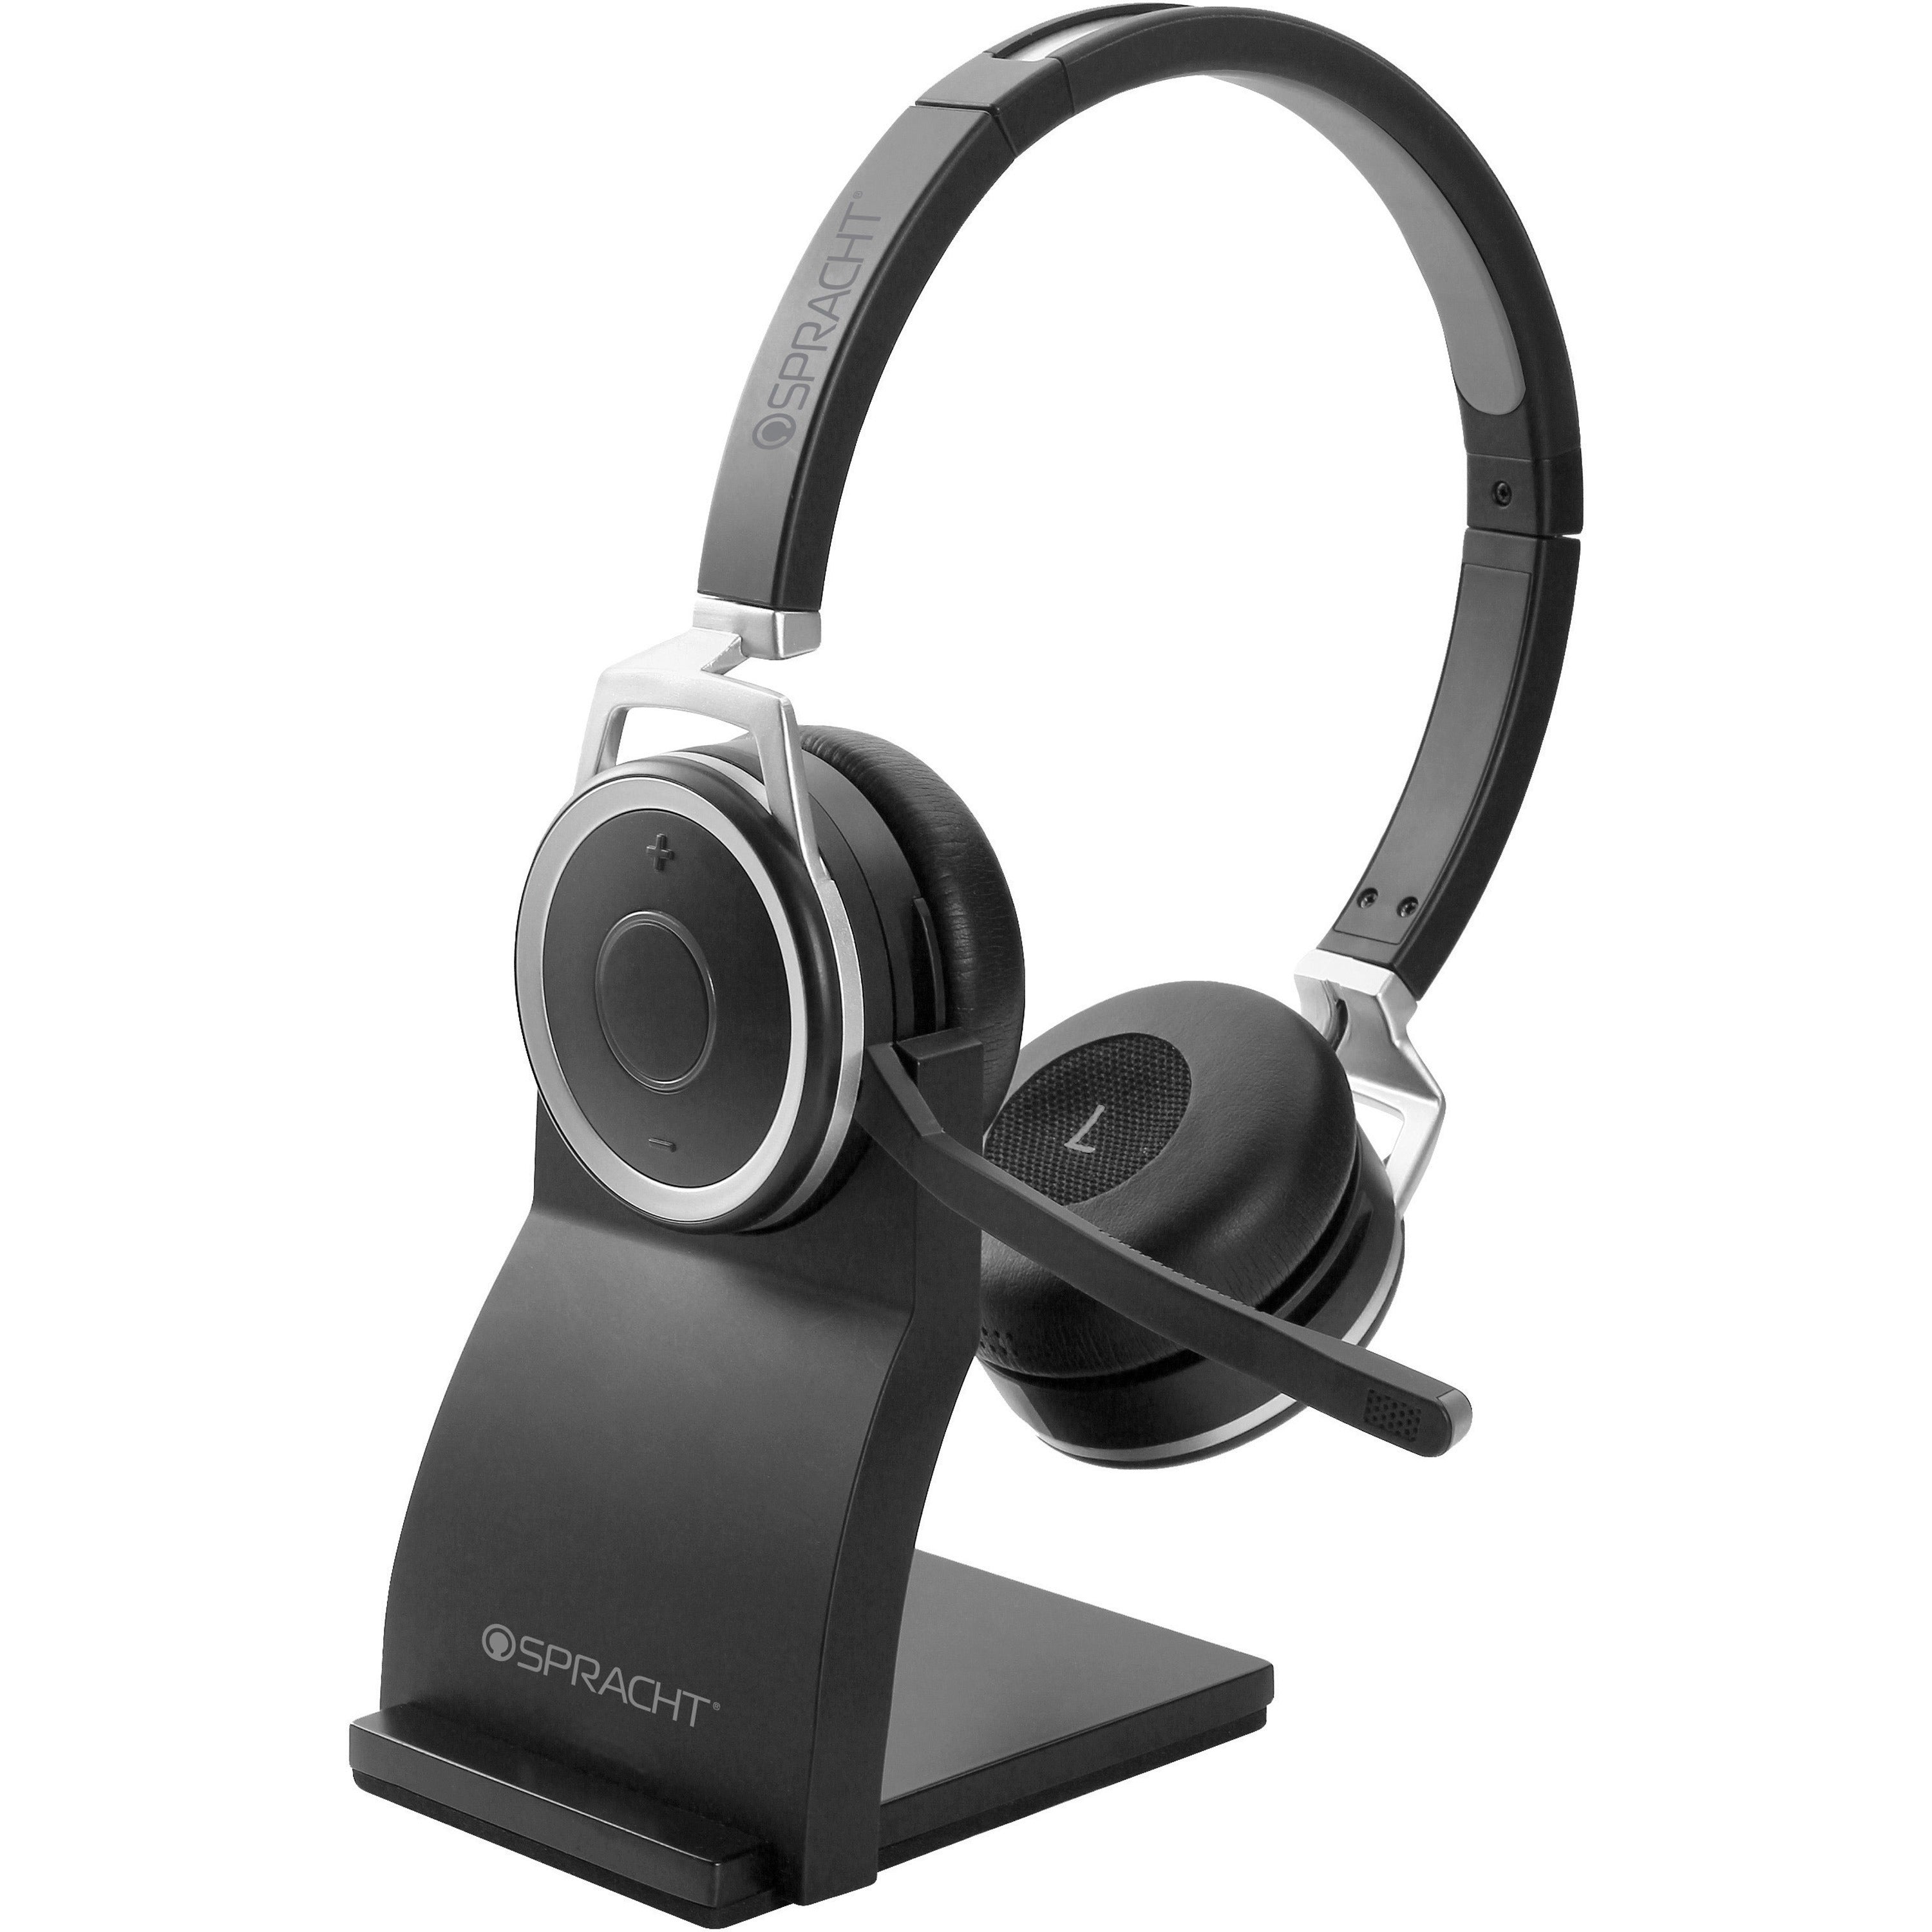 spracht-prestige-combo-headset-usb-wired-wireless-bluetooth-33-ft-over-the-head-noise-cancelling-microphone-black_sptzumbtp410 - 1